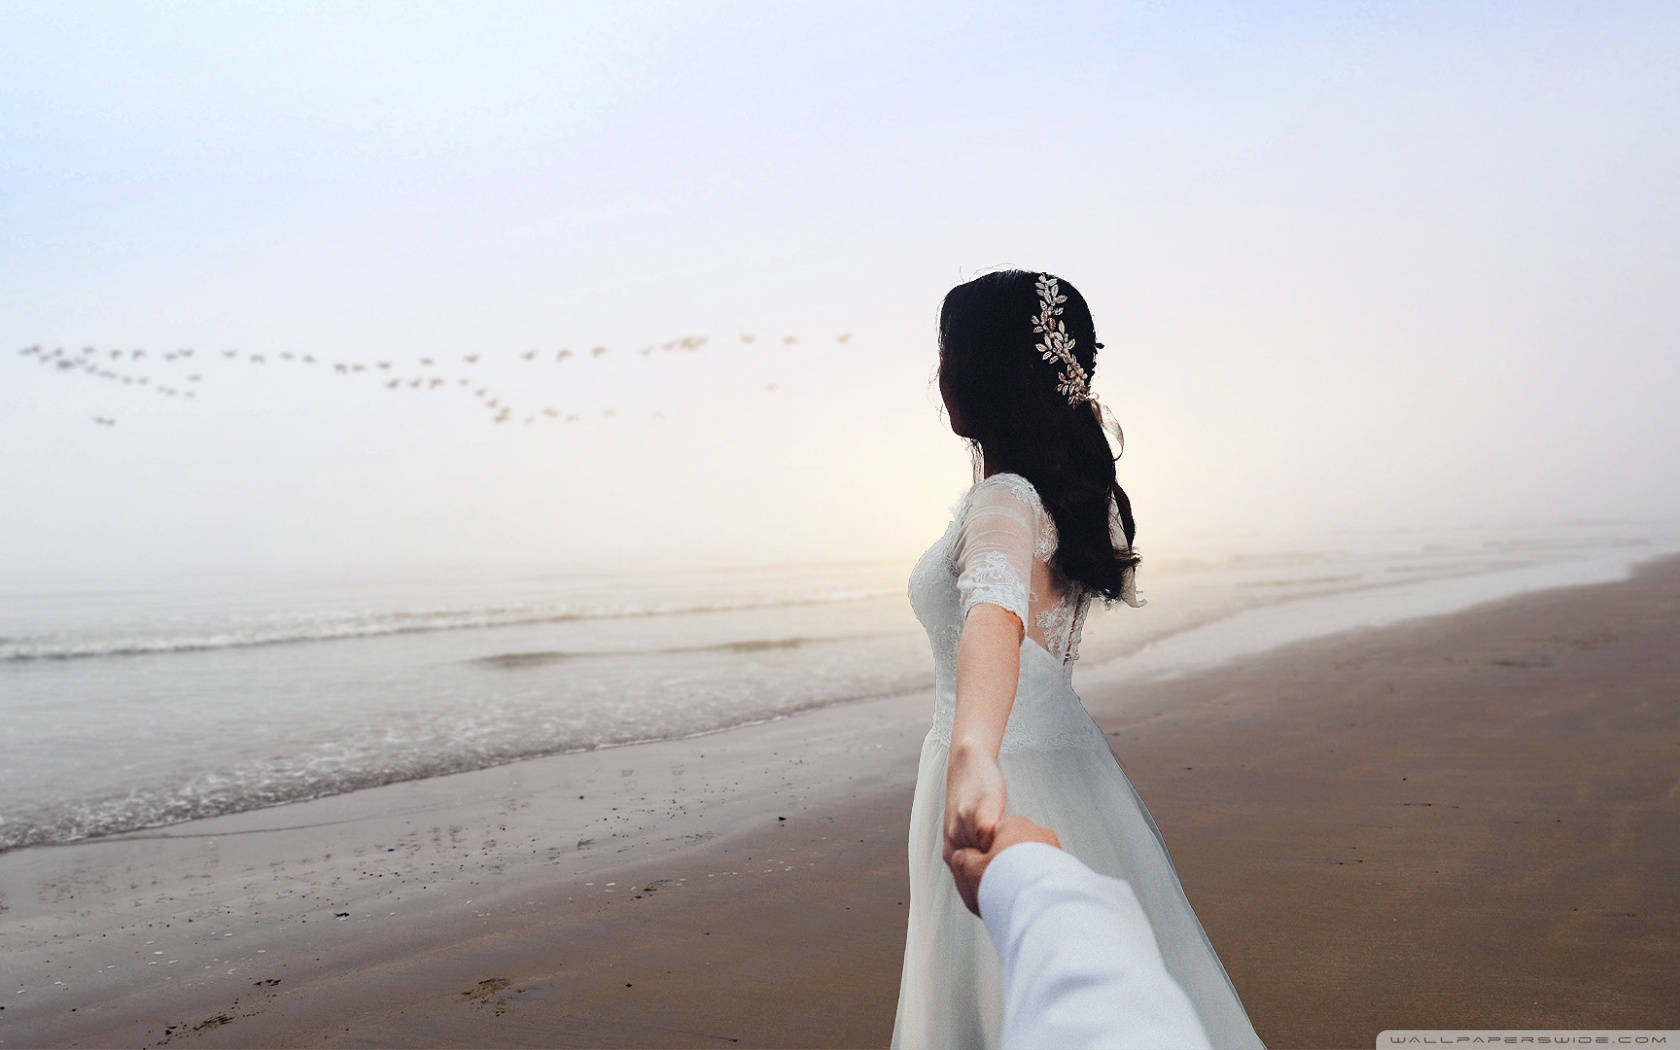 Holding Hands By The Beach In Wedding Gown Background